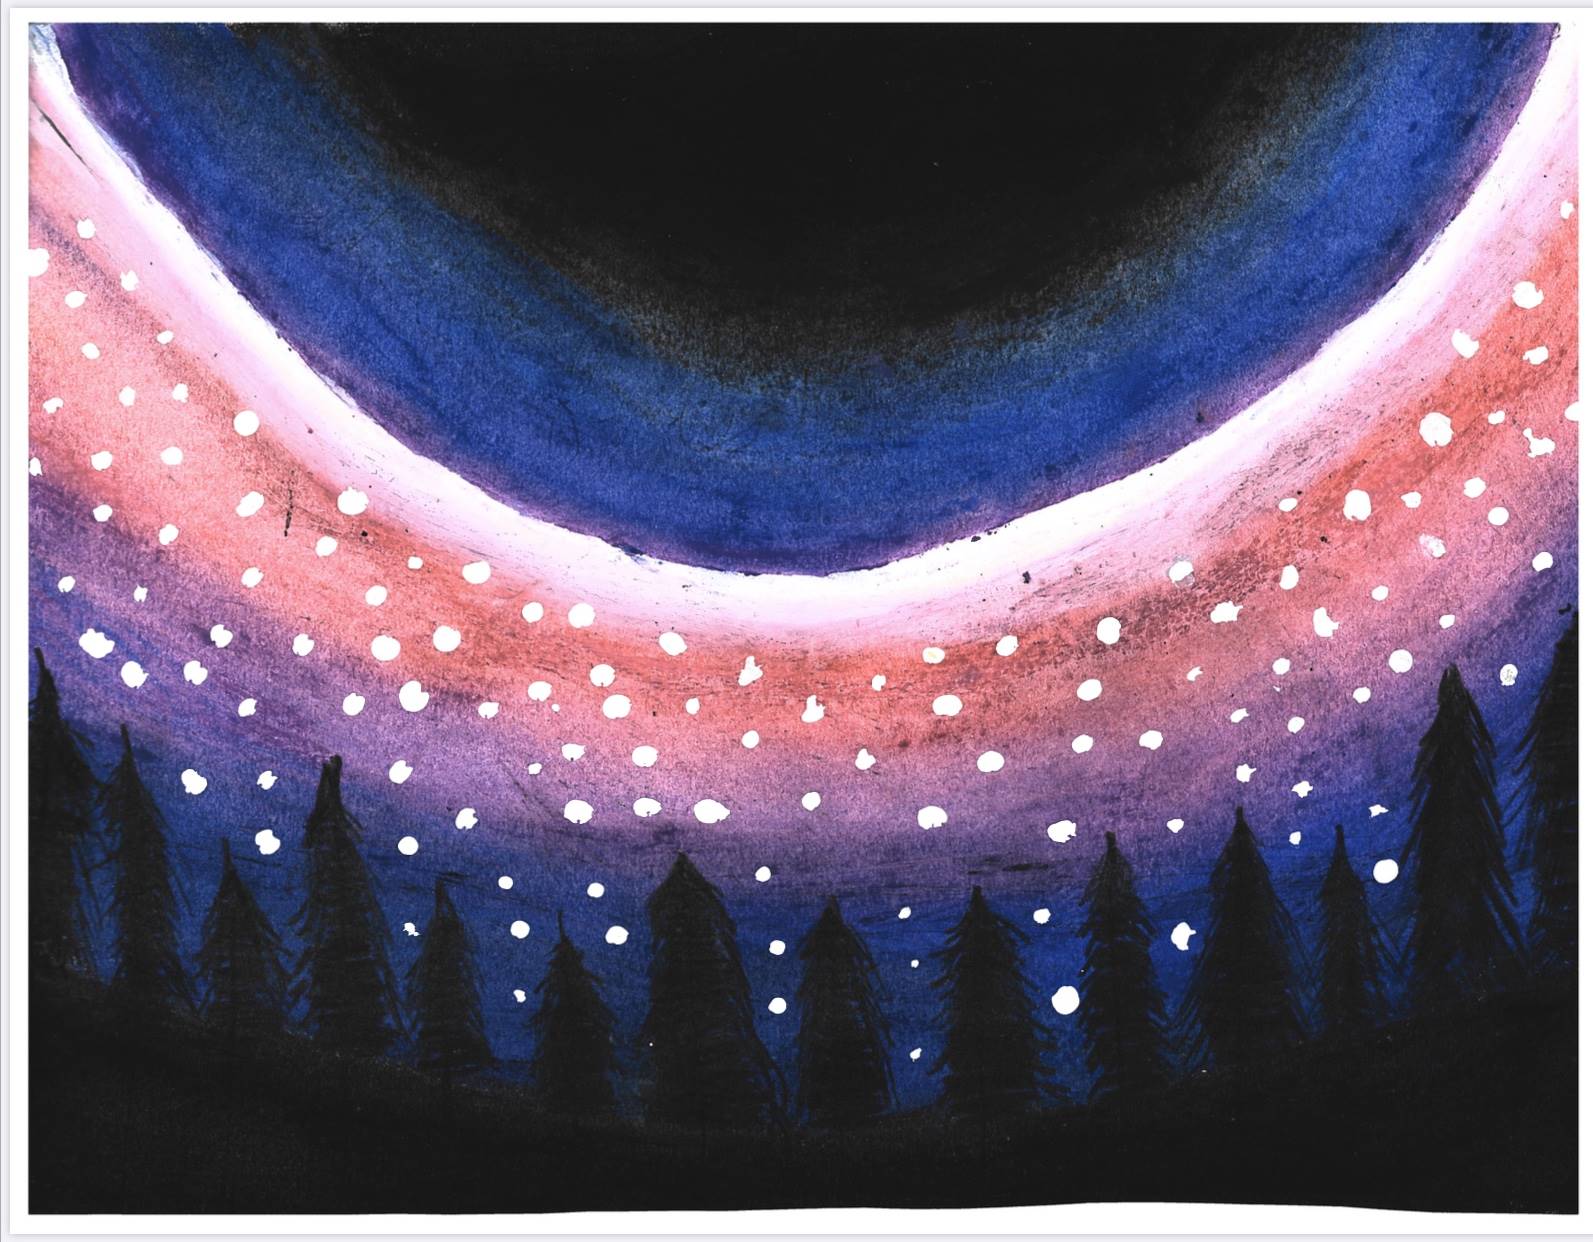 Night sky Holiday Card Art Contest entry